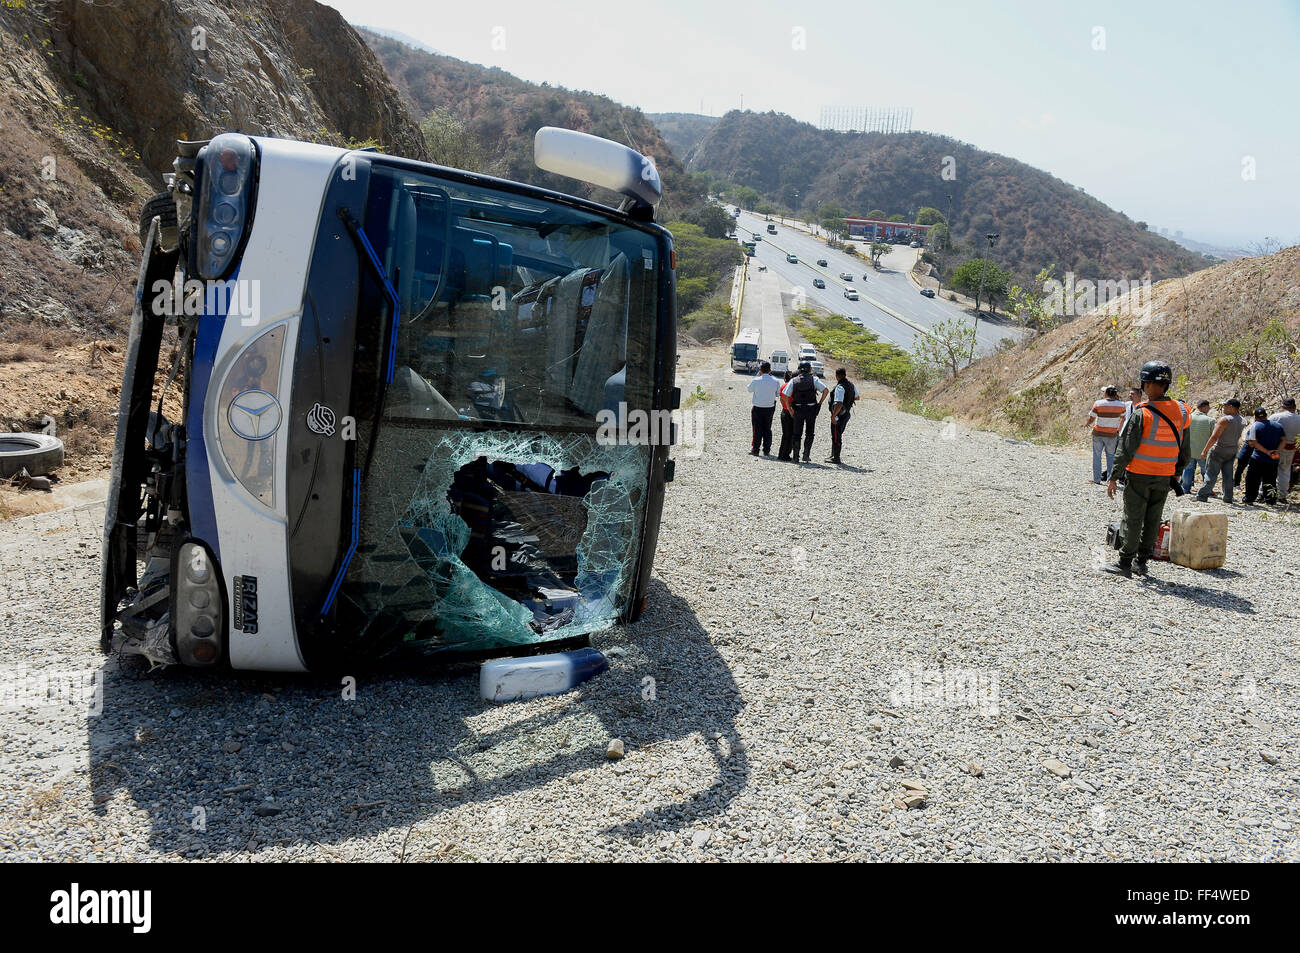 Caracas-La Guaira highway, Vargas state, Venezuela. 10th February, 2016. A bus transporting the Argentine soccer team Huracan is seen after the accident at Caracas-La Guaira highway, Vargas state, Venezuela, on Feb. 10, 2016. Five soccer players and a physical trainer from Argentina's Huracan were injured on Wednesday when the bus transporting the team to the Maiquetia 'Simon Bolivar' International Airport, in the central-northern state of Vargas, overturned. Credit:  Xinhua/Alamy Live News Stock Photo